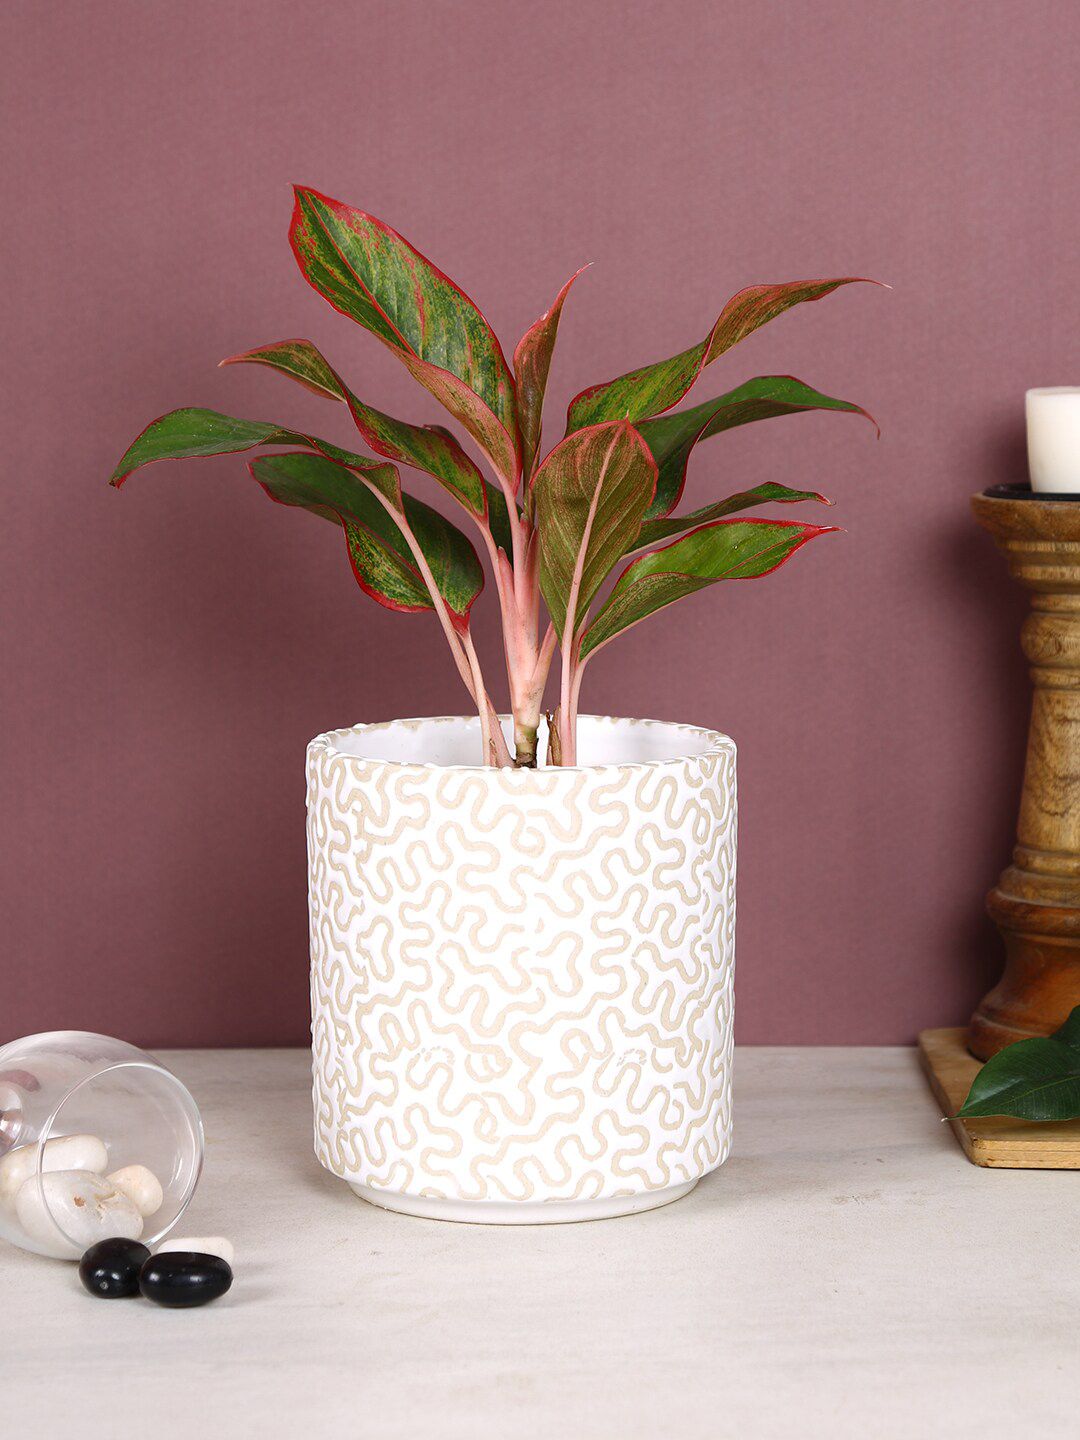 Aapno Rajasthan White & Beige Textured Ceremic Planter Price in India